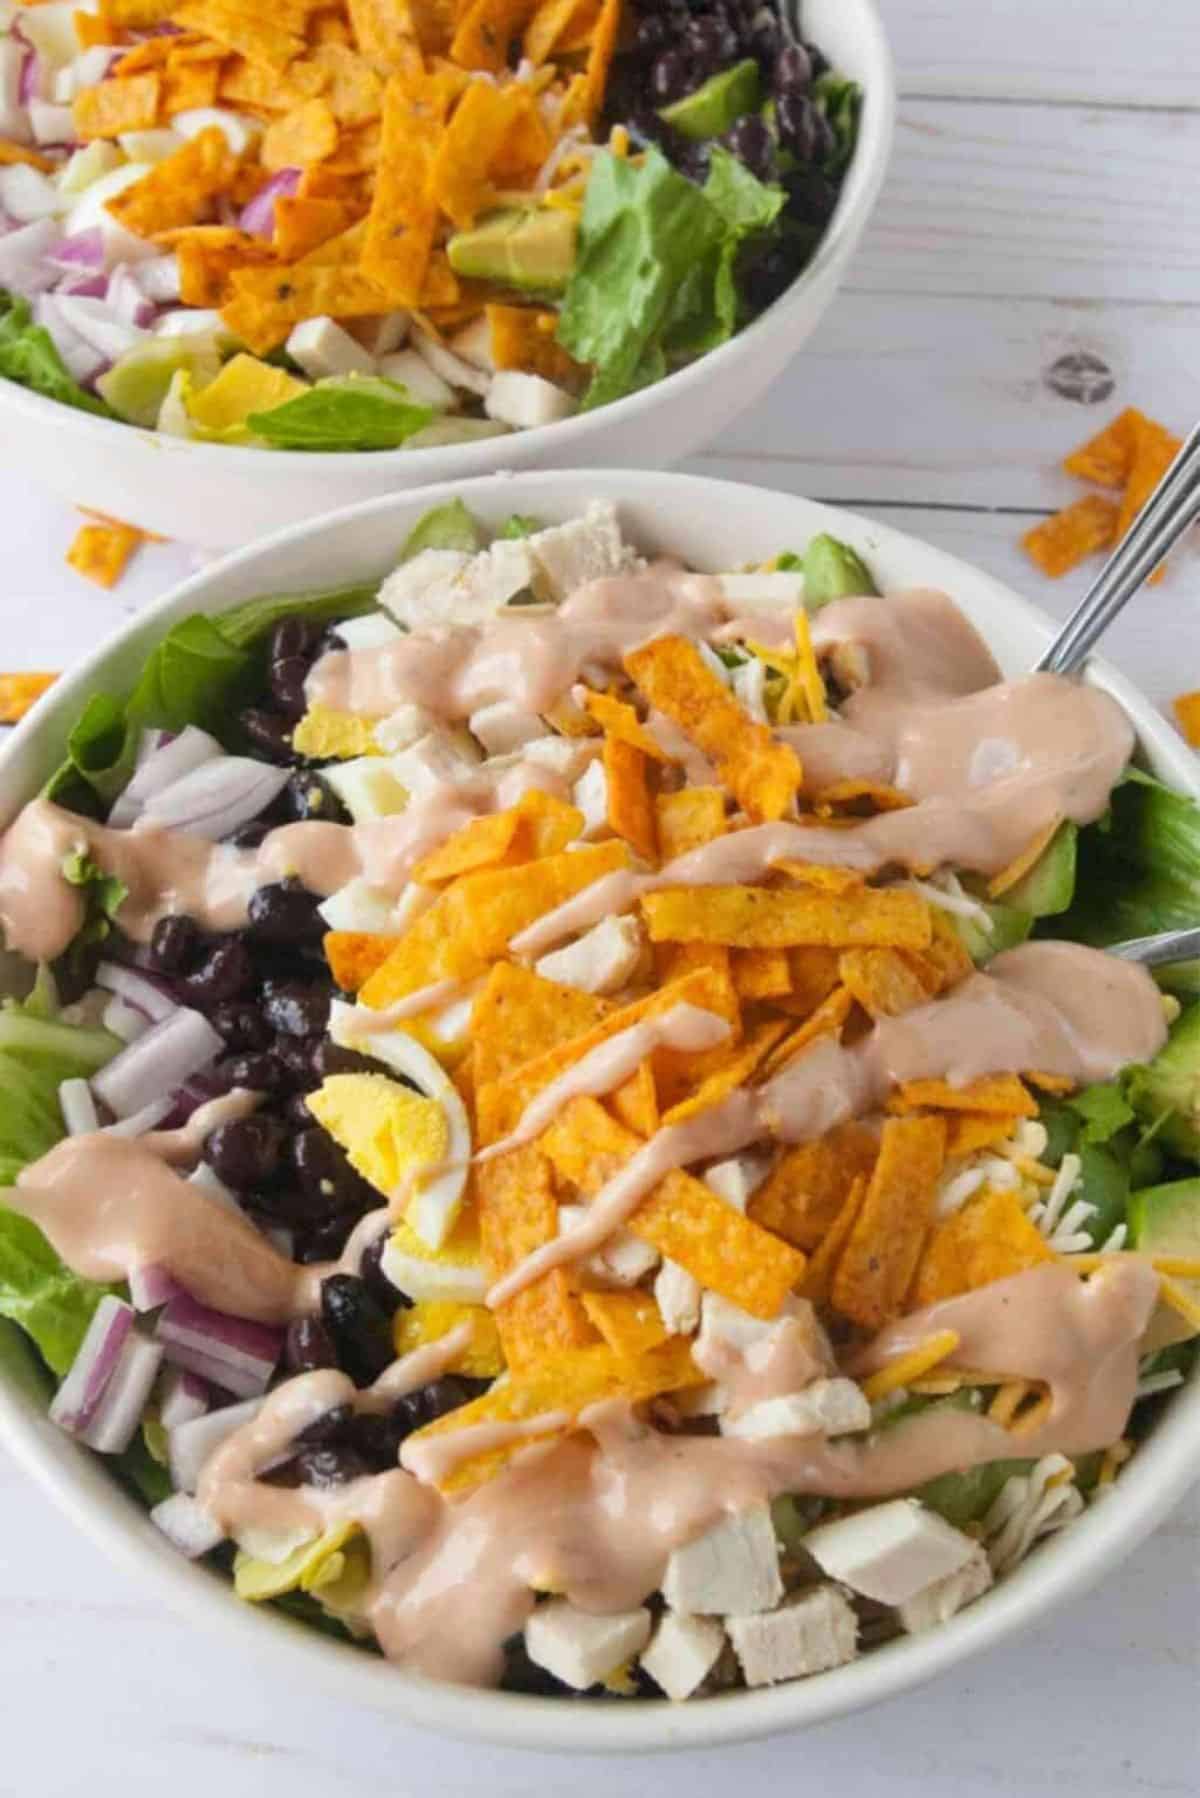 Scrumptious Southern BBQ Chicken Salad with Barbeque Ranch Dressing in a white bowl.